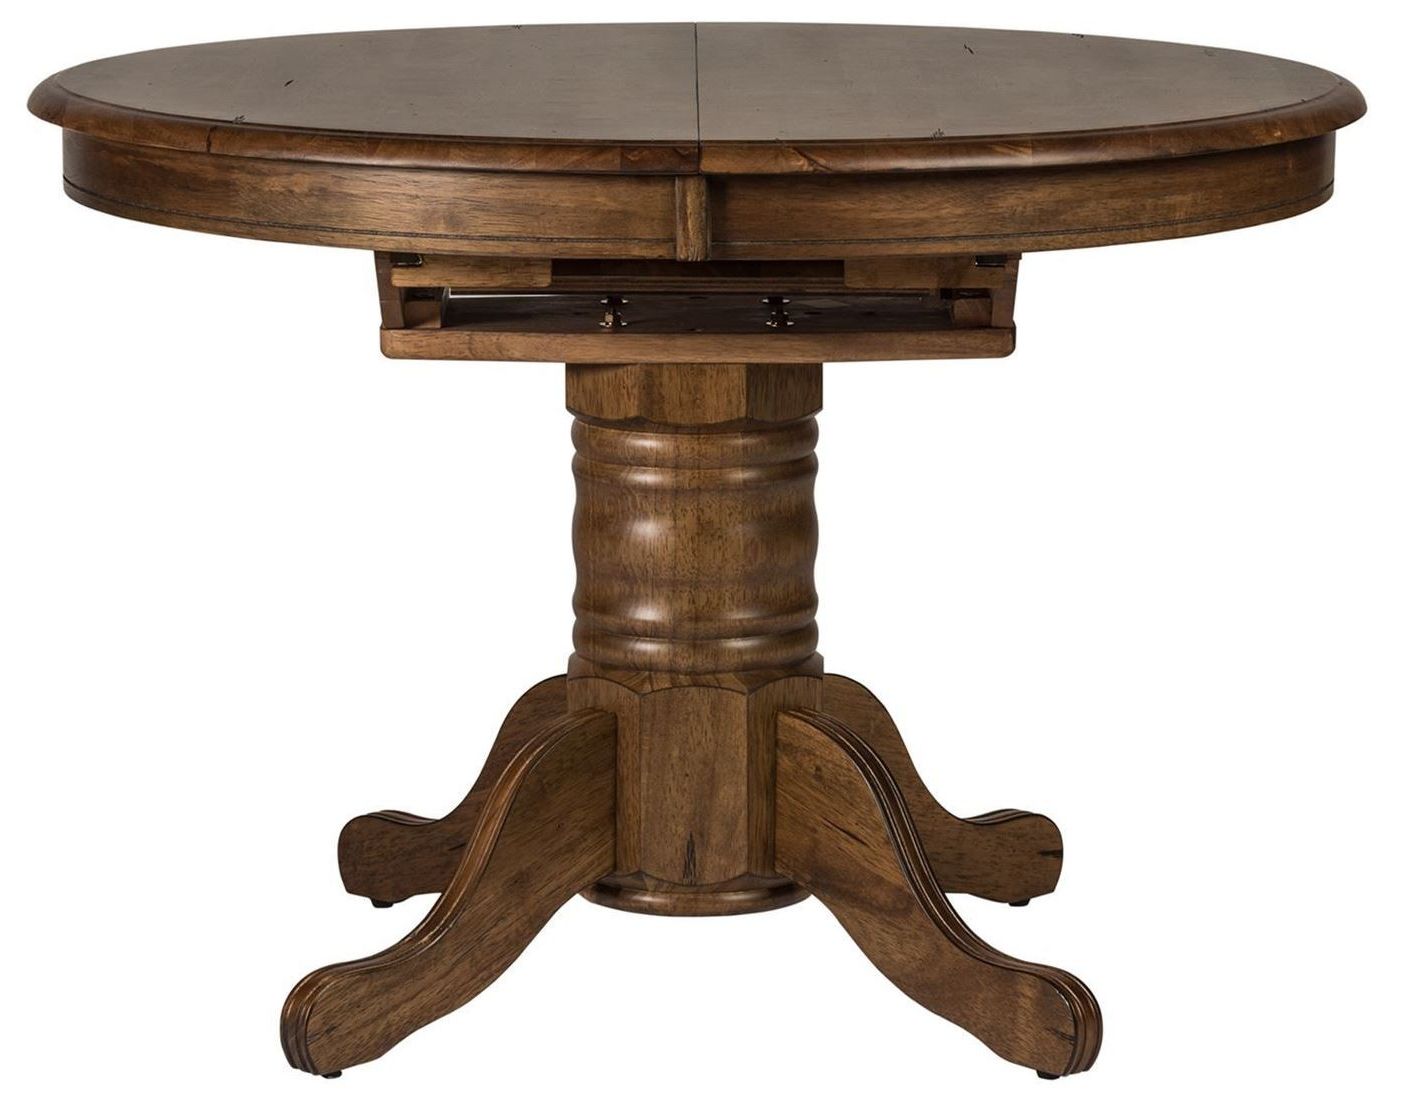 Carolina Crossing Antique Honey Oval Extendable Pedestal Within Newest Dawna Pedestal Dining Tables (View 1 of 20)